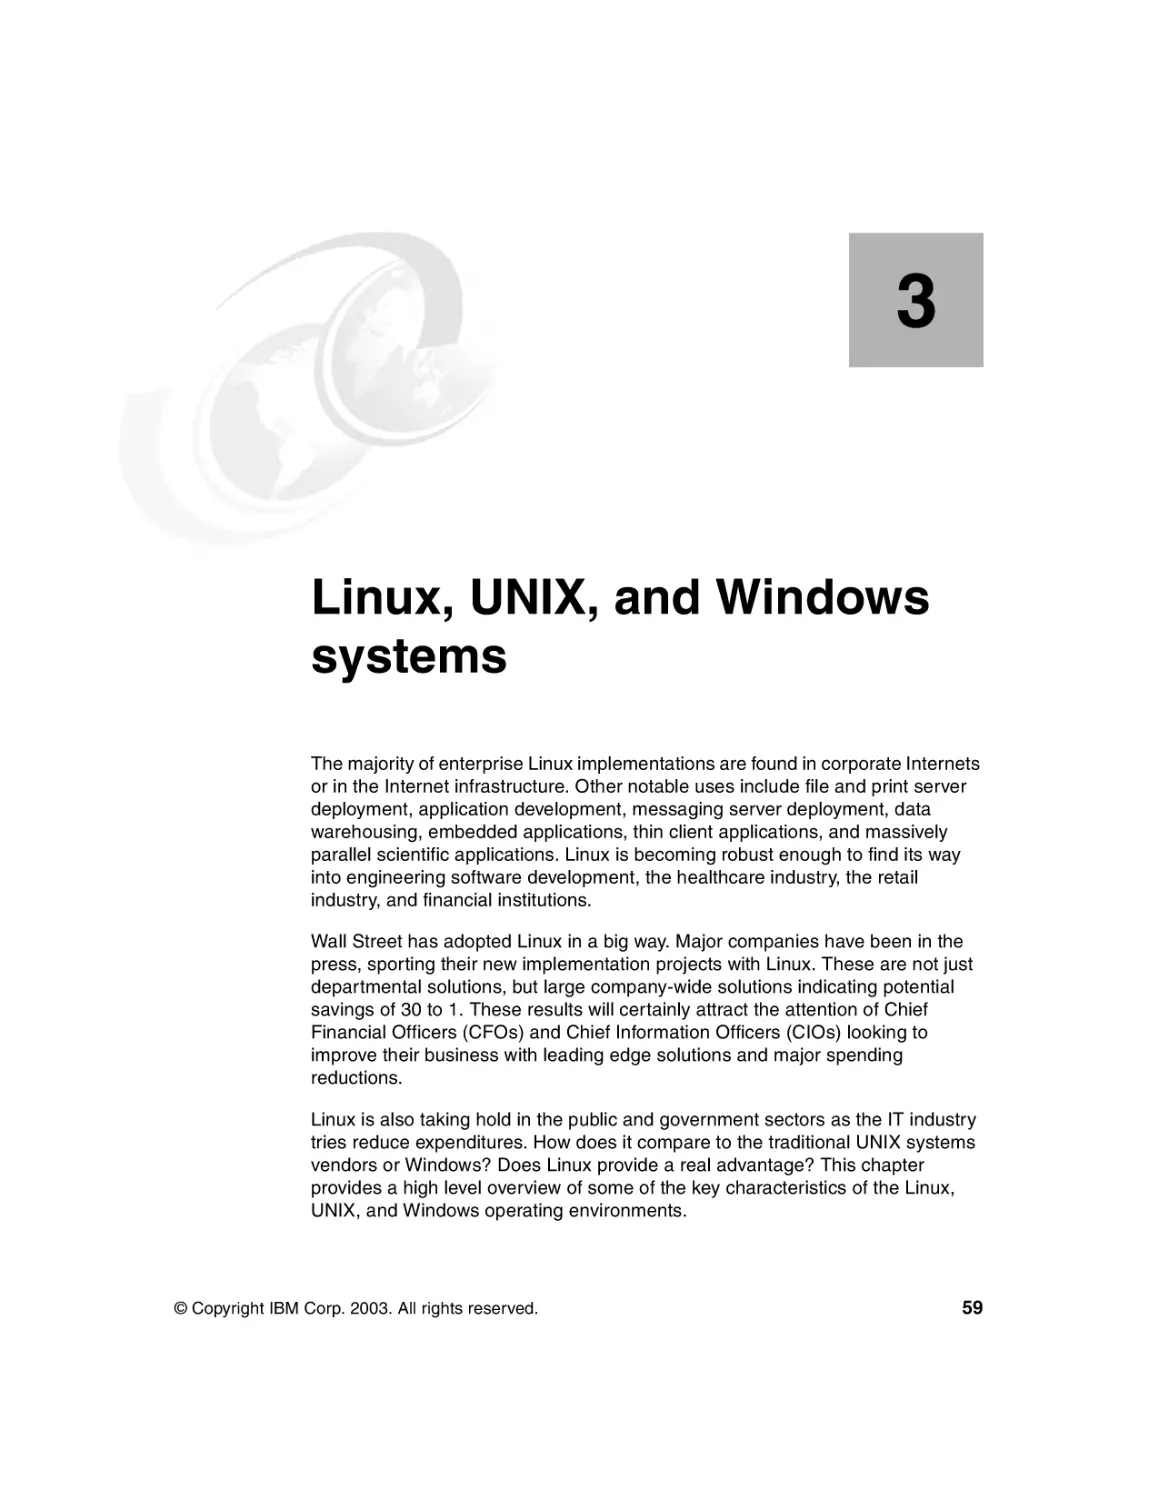 Chapter 3. Linux, UNIX, and Windows systems